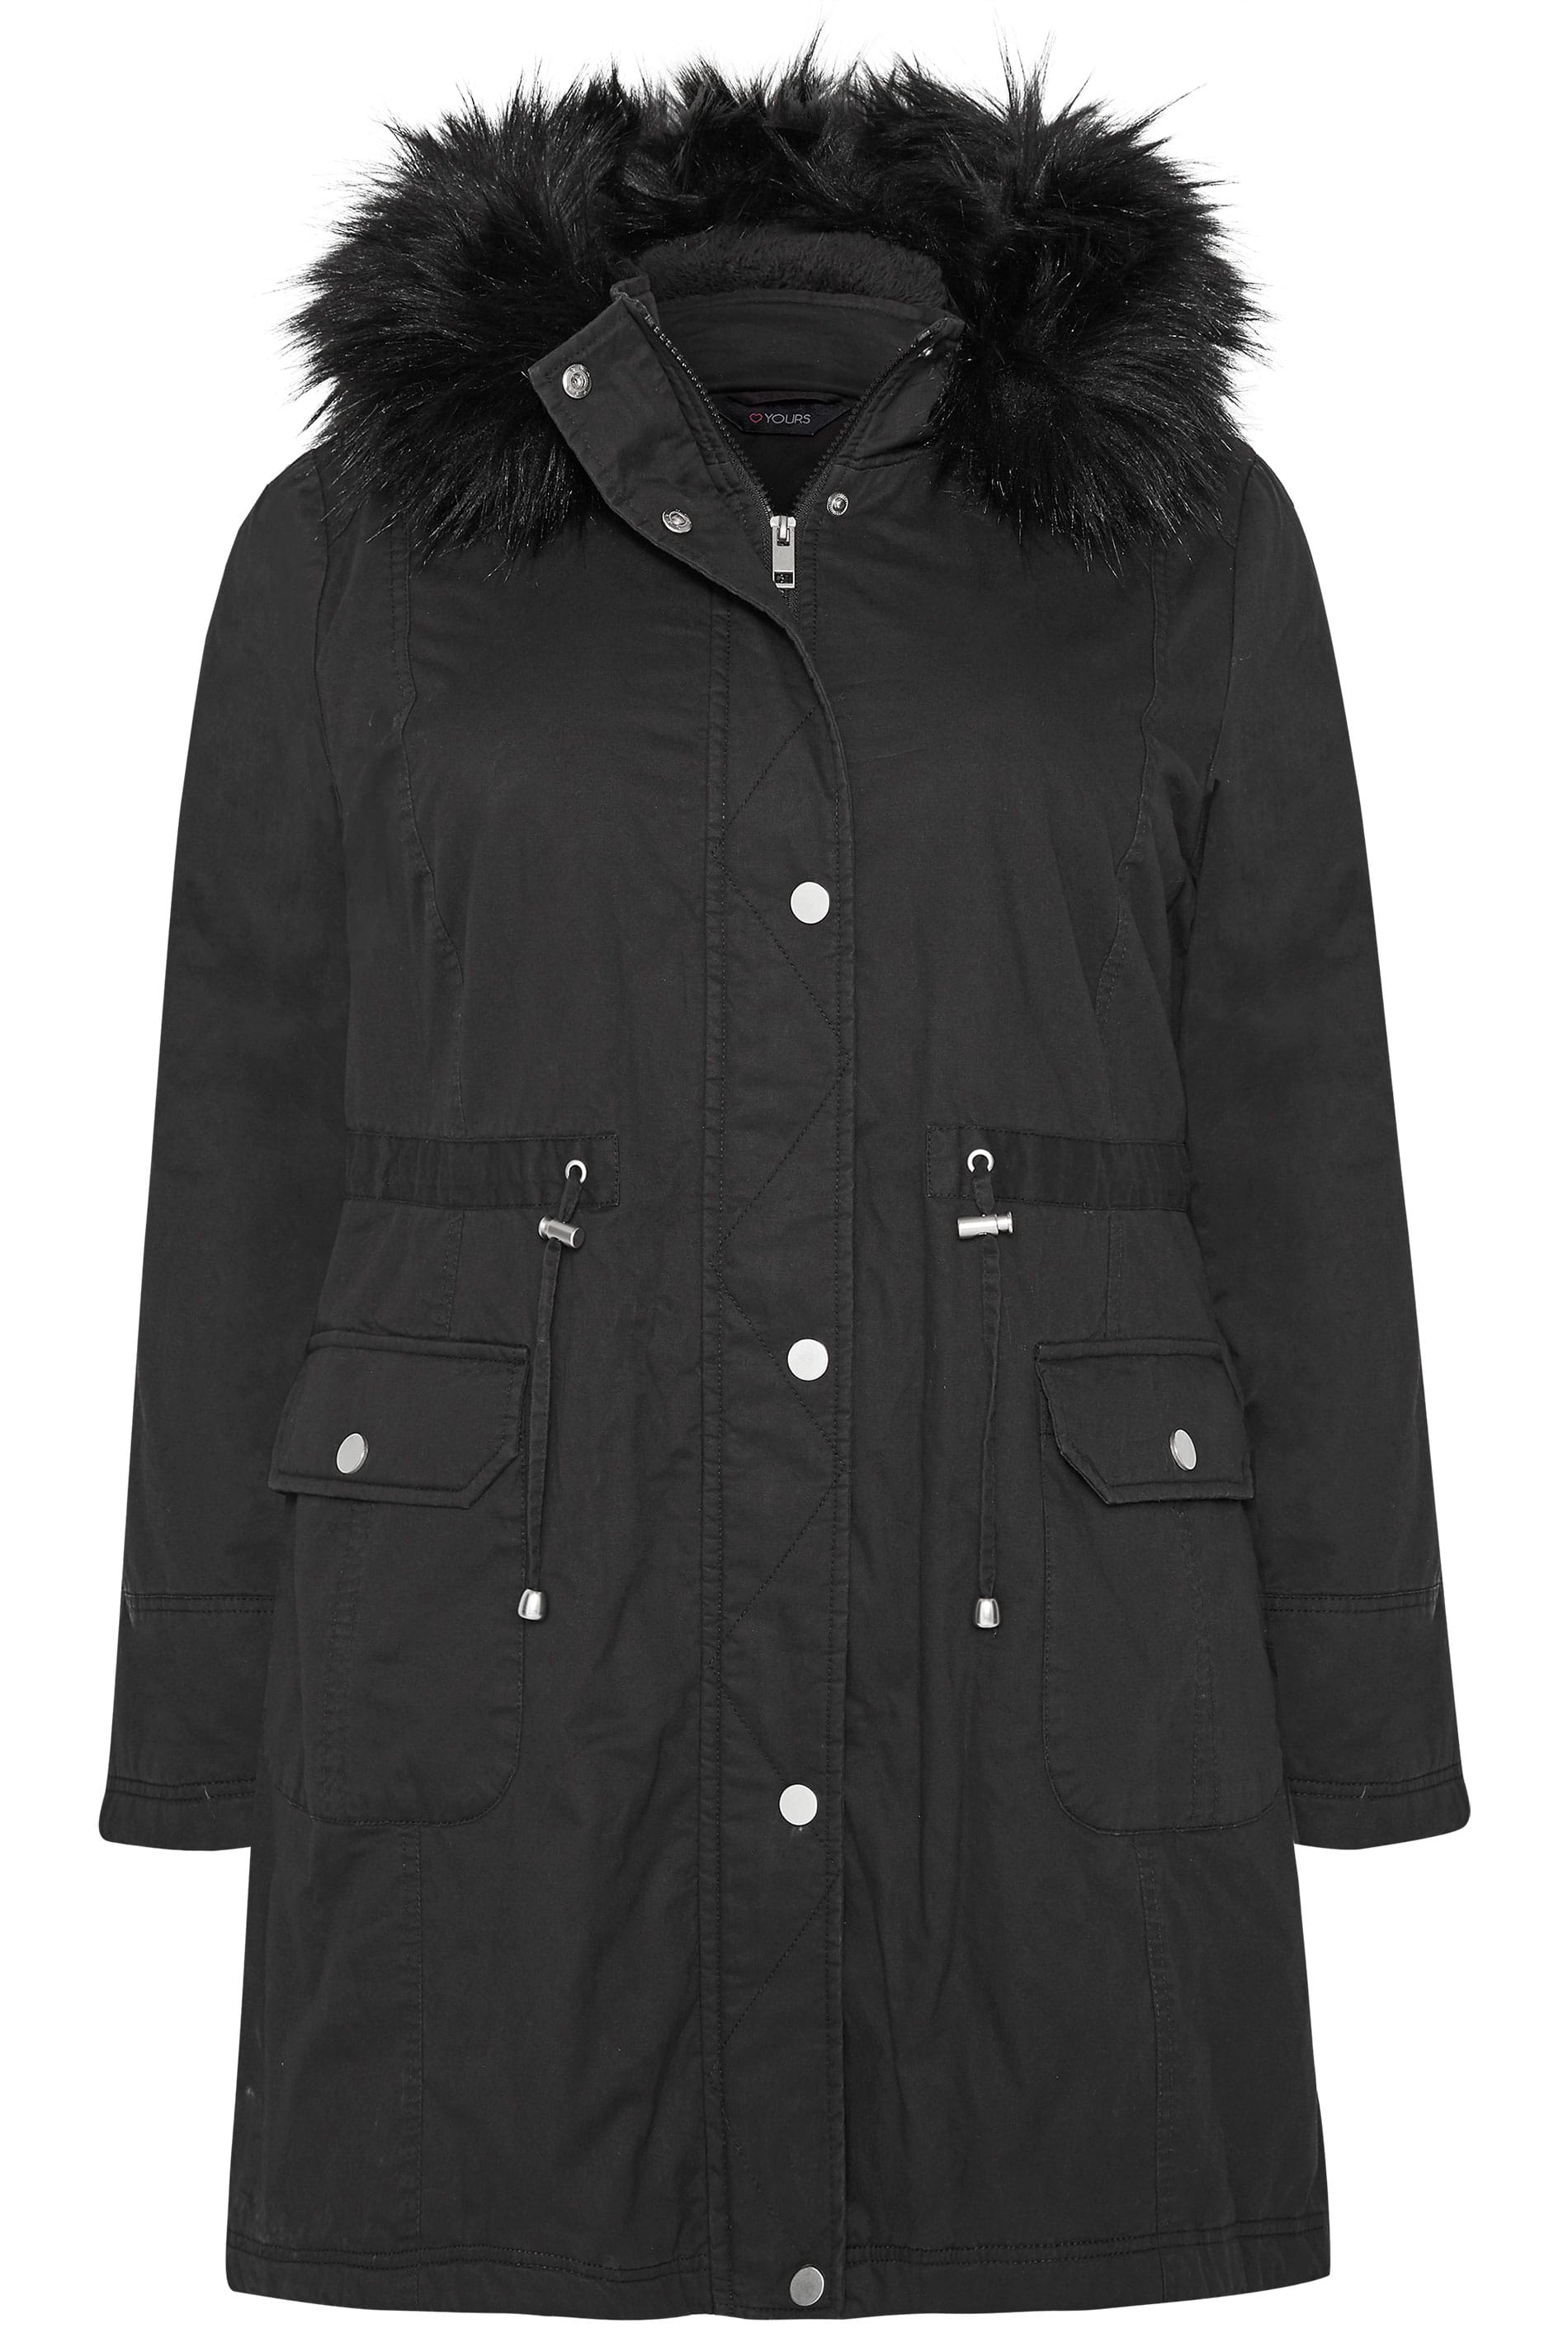 Black Fleece Lined Faux Fur Hooded Parka | Sizes 16-40 | Yours Clothing